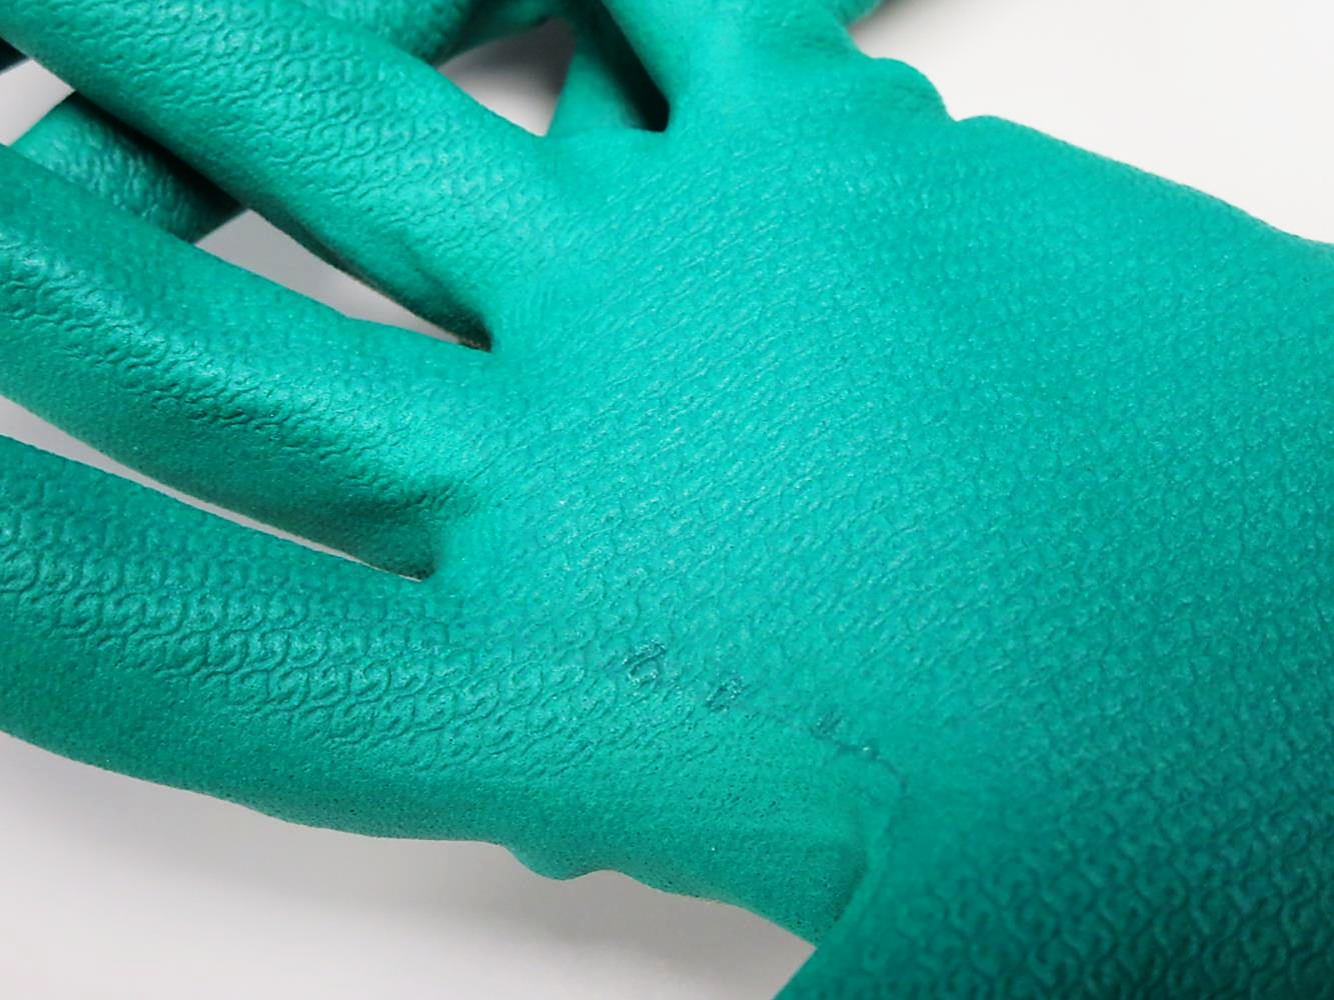 Showa® 383 Sustainable General-Duty Microporous Nitrile Coated Waffle Textured Multi-Purpose Industrial Work Gloves with Eco-Best Technology® provides accelerated biodegradation in landfill. 